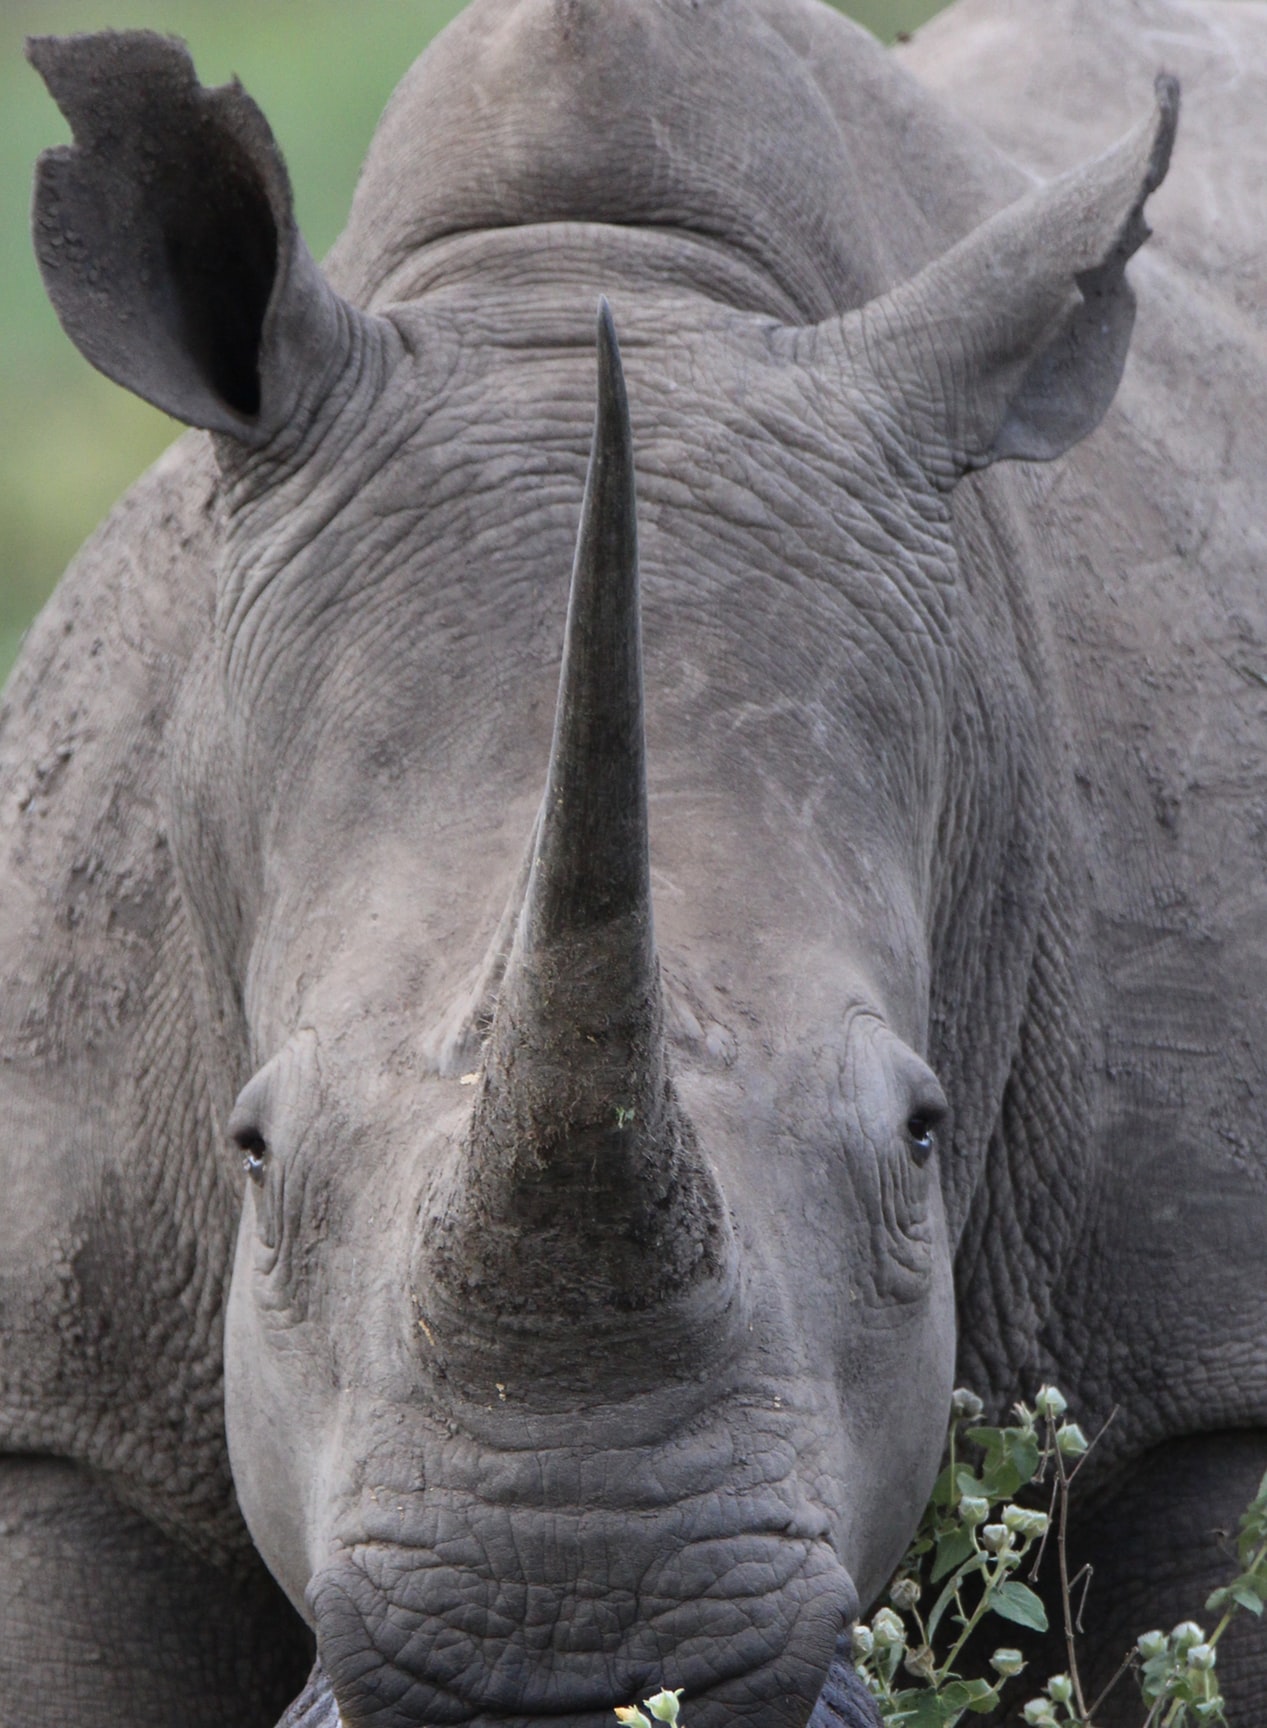 Rhino poaching in South Africa has dropped significantly, seeing the 5th consecutive year of reductions following major crackdowns on organised crime syndicates.